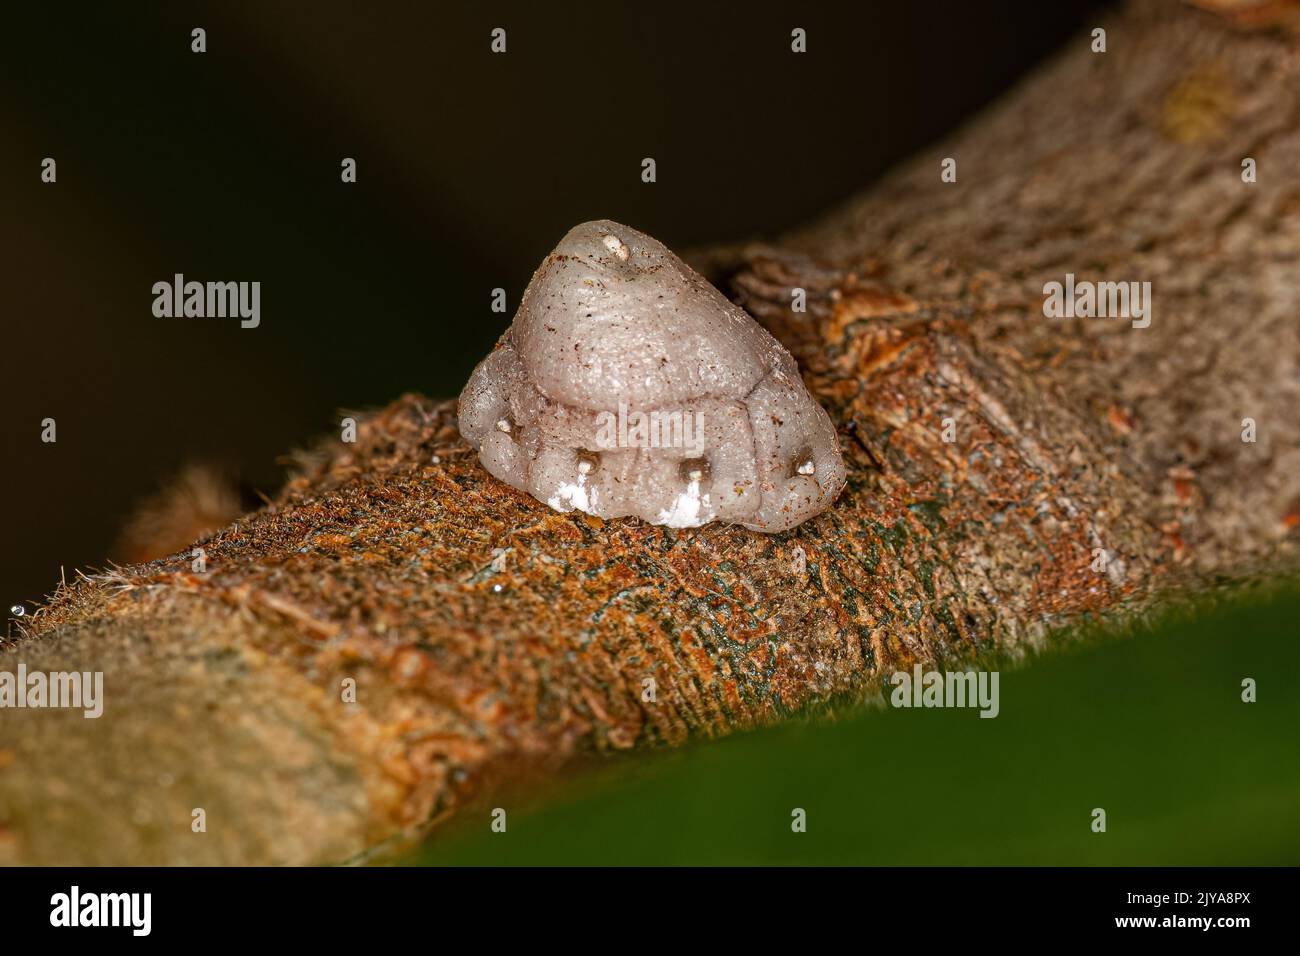 White Tortoise Scale of the Family Coccidae Stock Photo